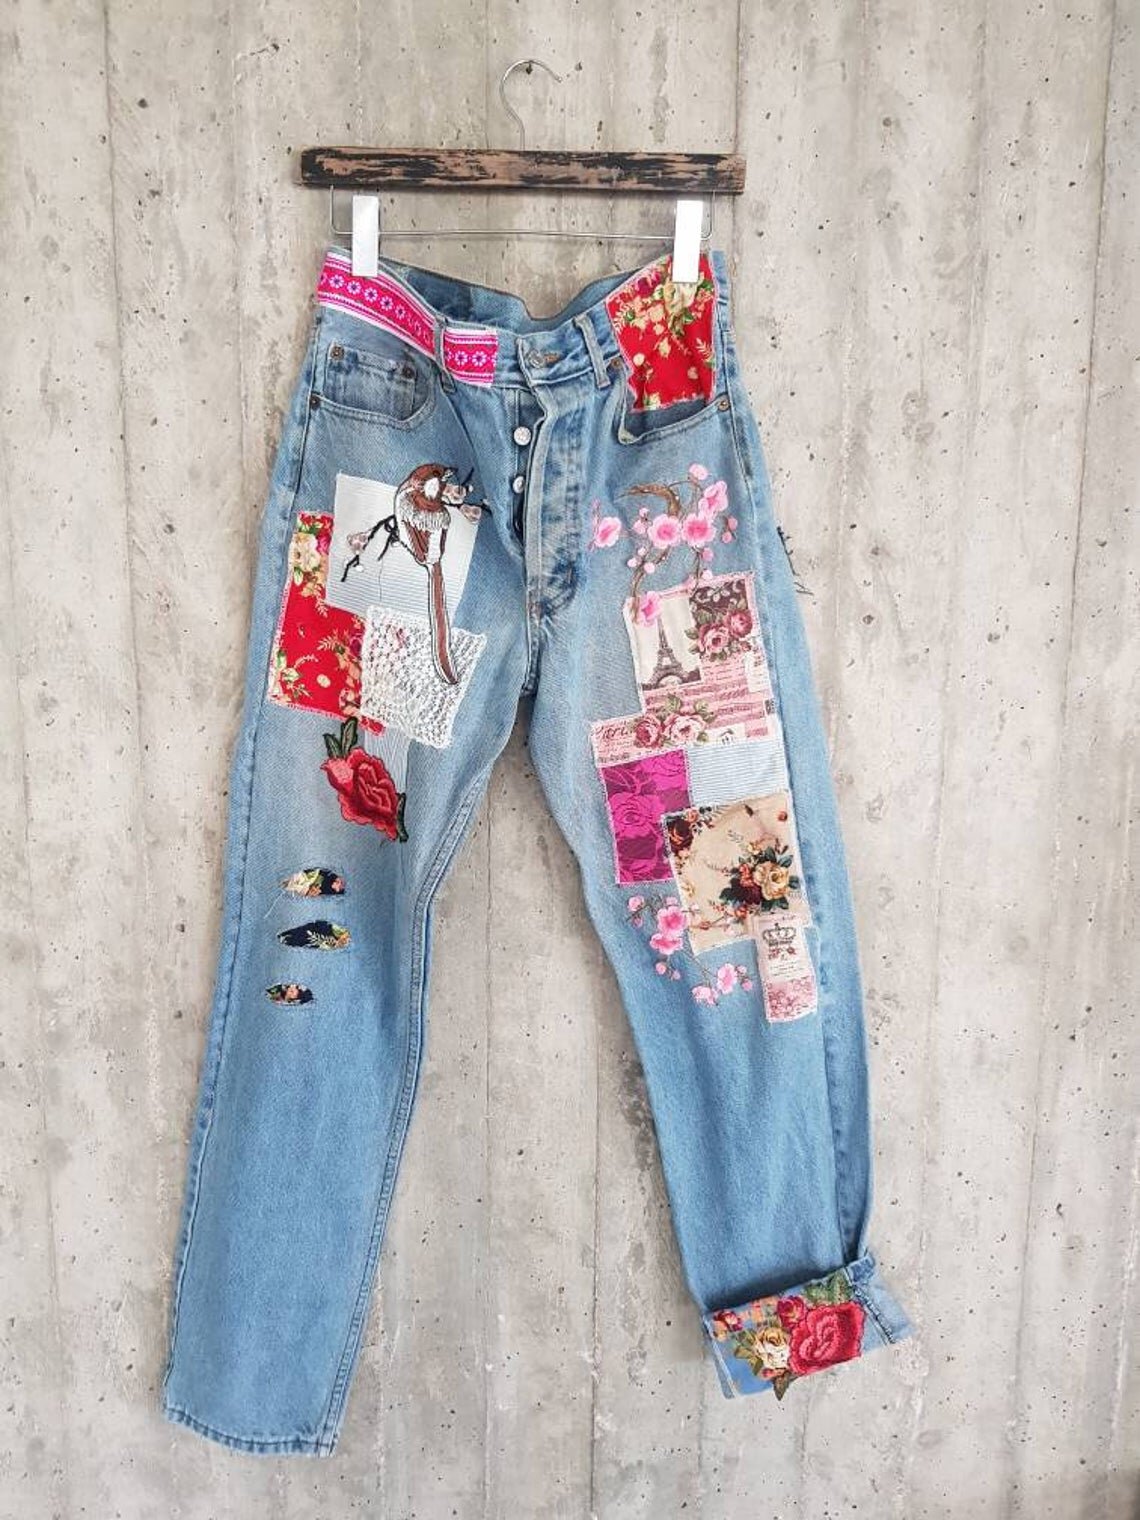 Re-Worked Jeans: Patchwork, Embellished, + Painted Denim Looks We'd Copy Right Now firefly+finch